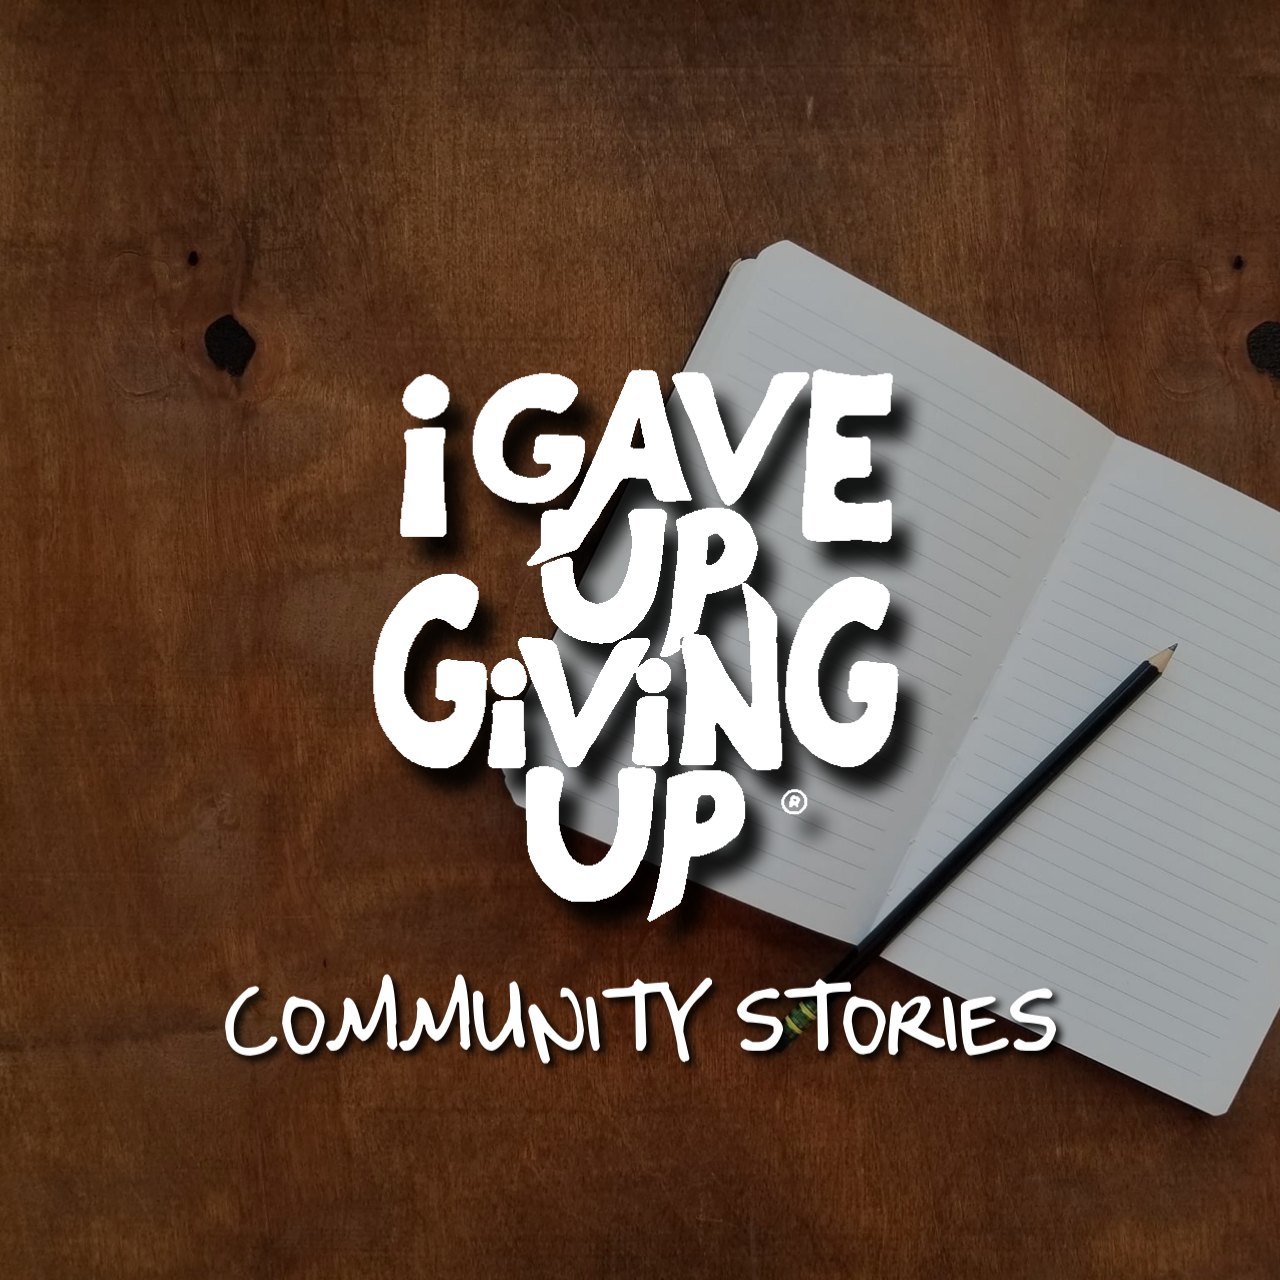 I Gave Up Giving Up® Community Stories